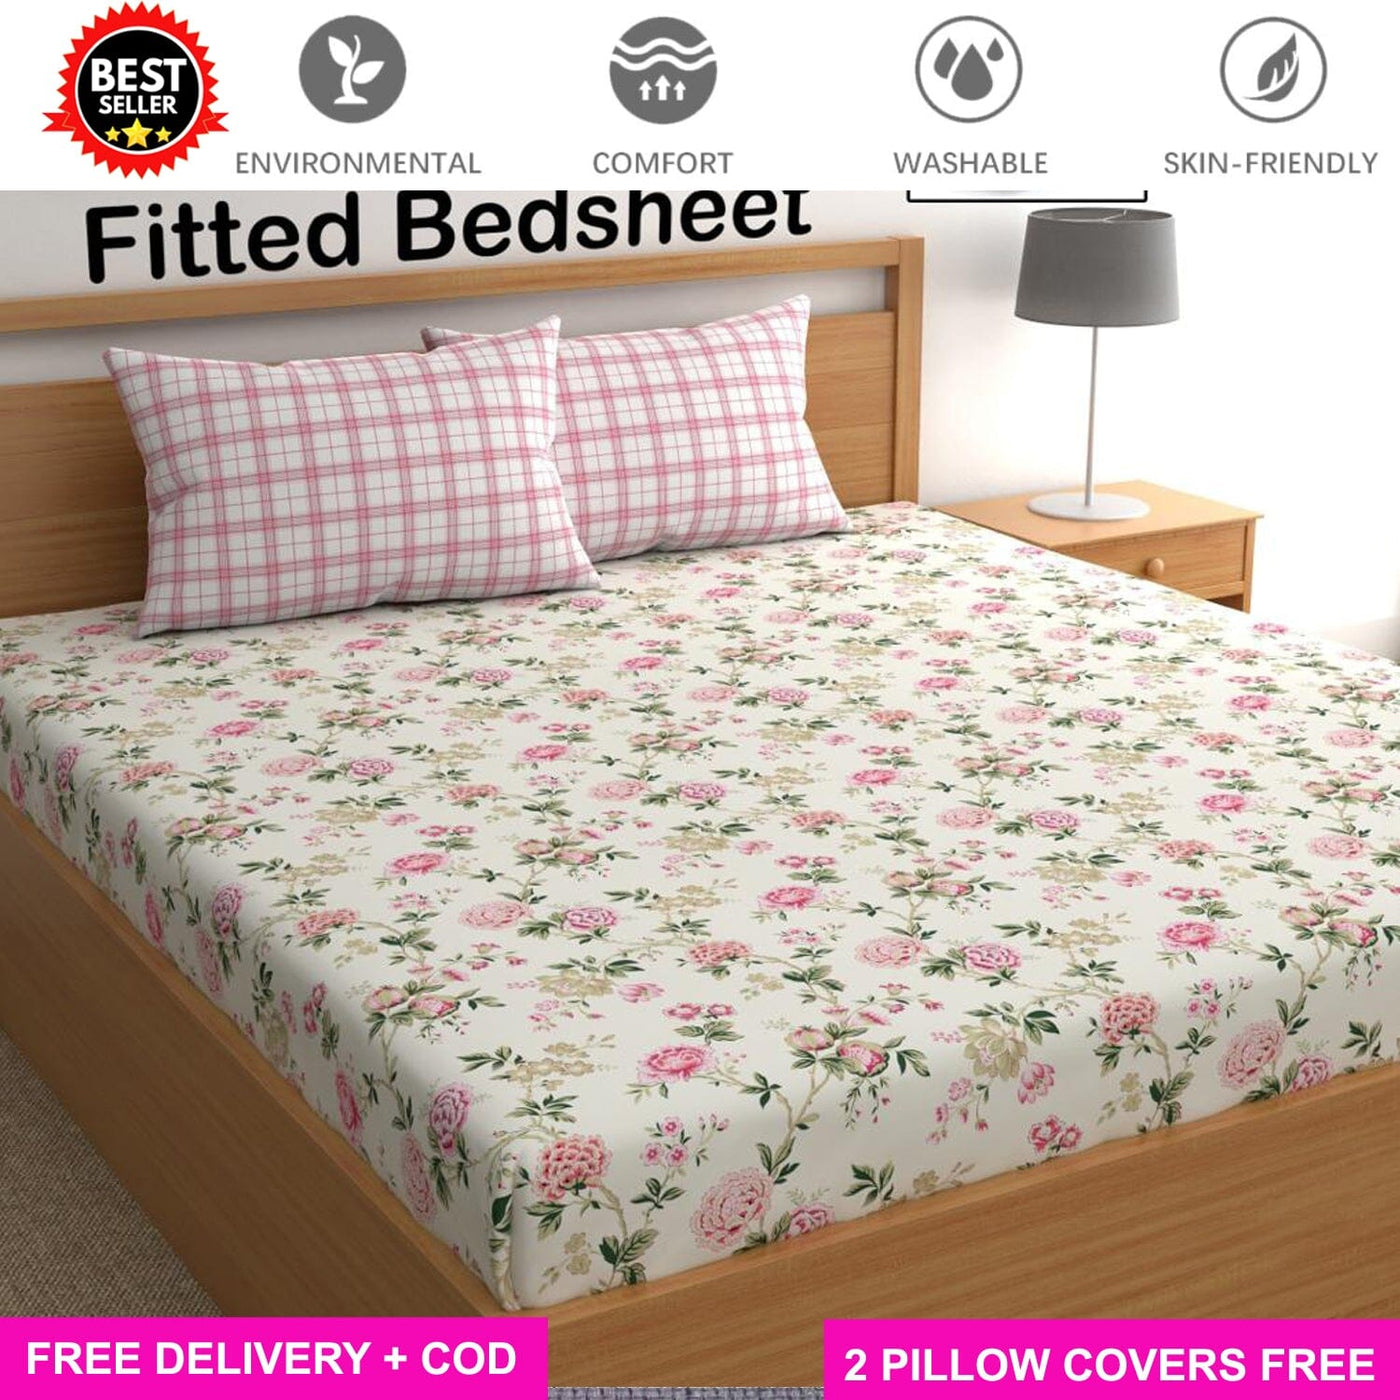 Cotton Elastic Fitted Bedsheet with 2 Pillow Covers - Fits with any Beds & Mattresses Great Happy IN Pink Rose Contrast KING SIZE 